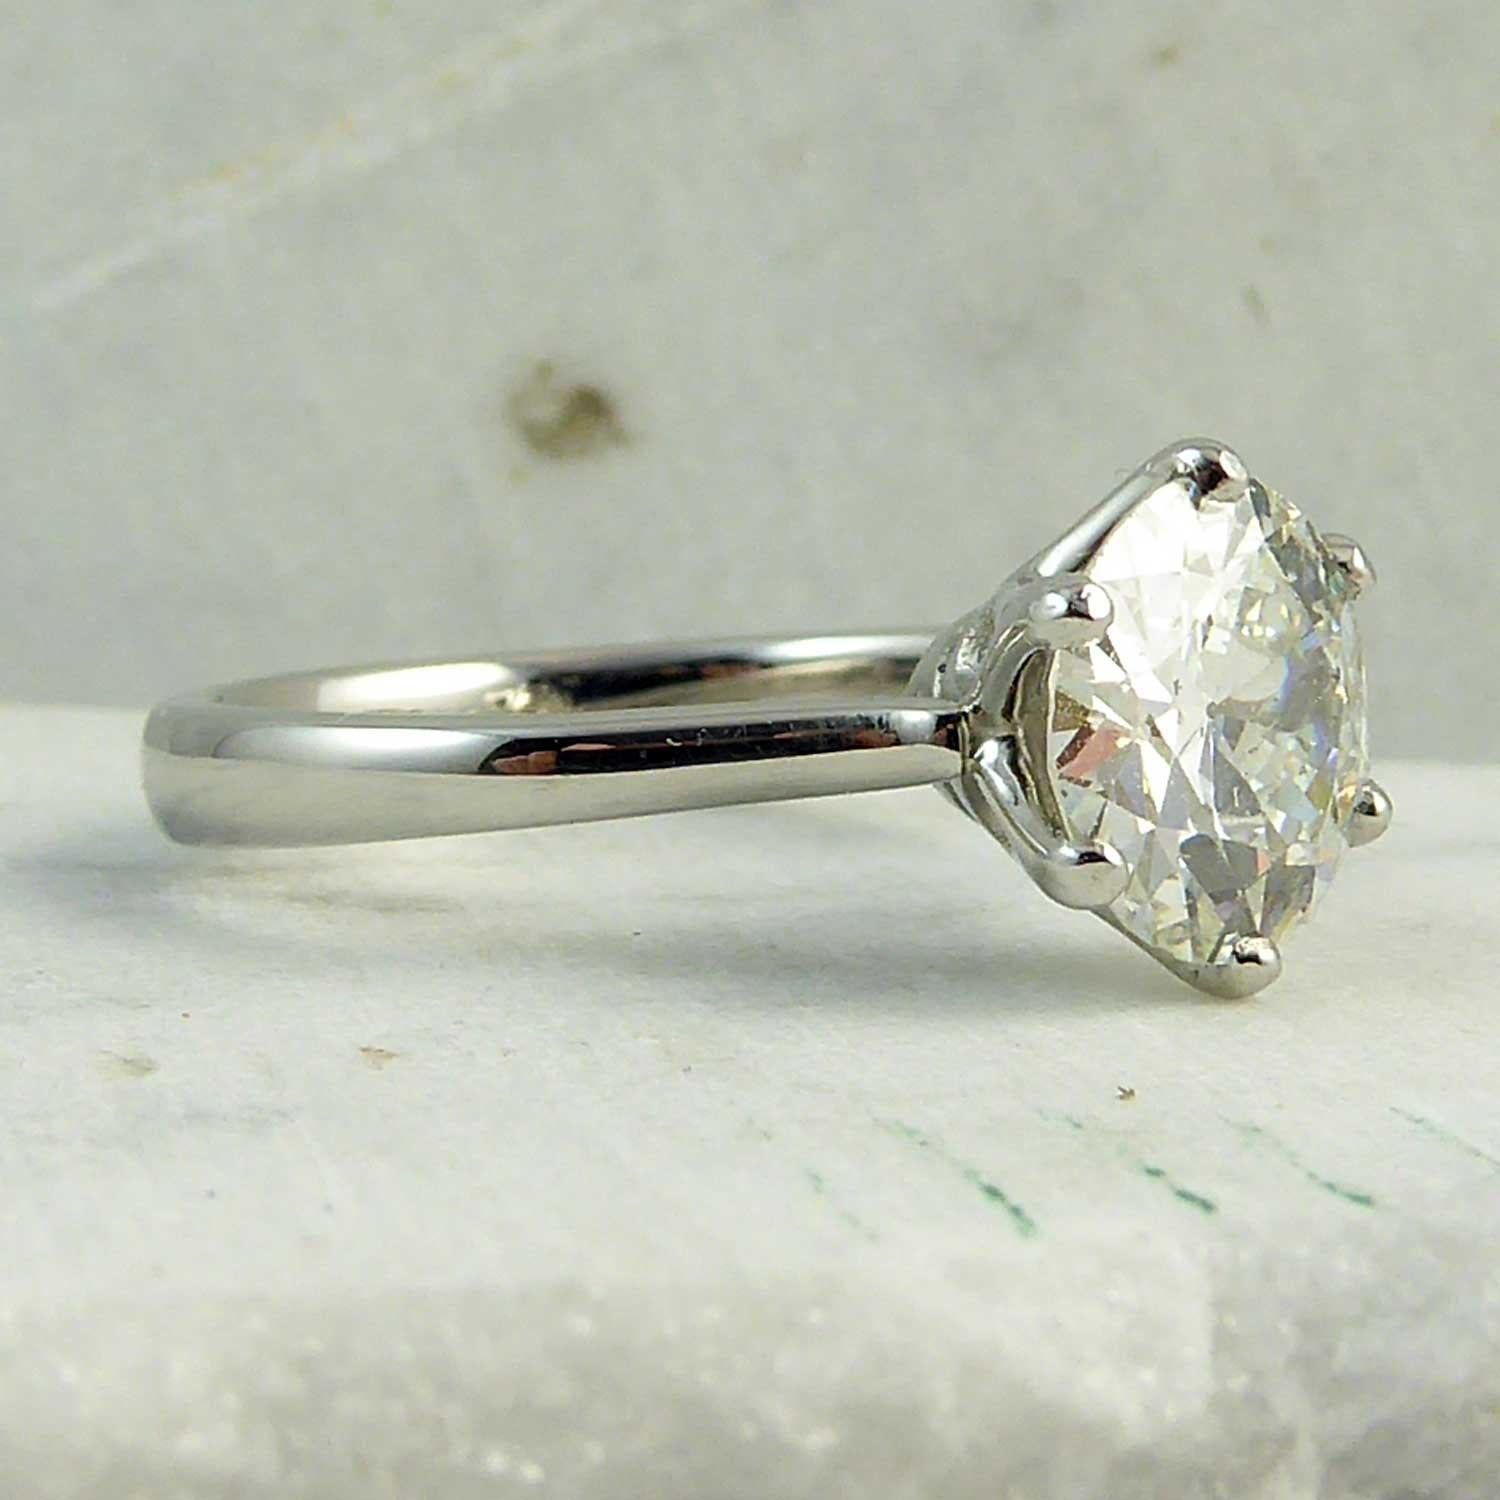 2.02 Carat Early Brilliant Cut Diamond Traditionally Set in a New Platinum Mount 2